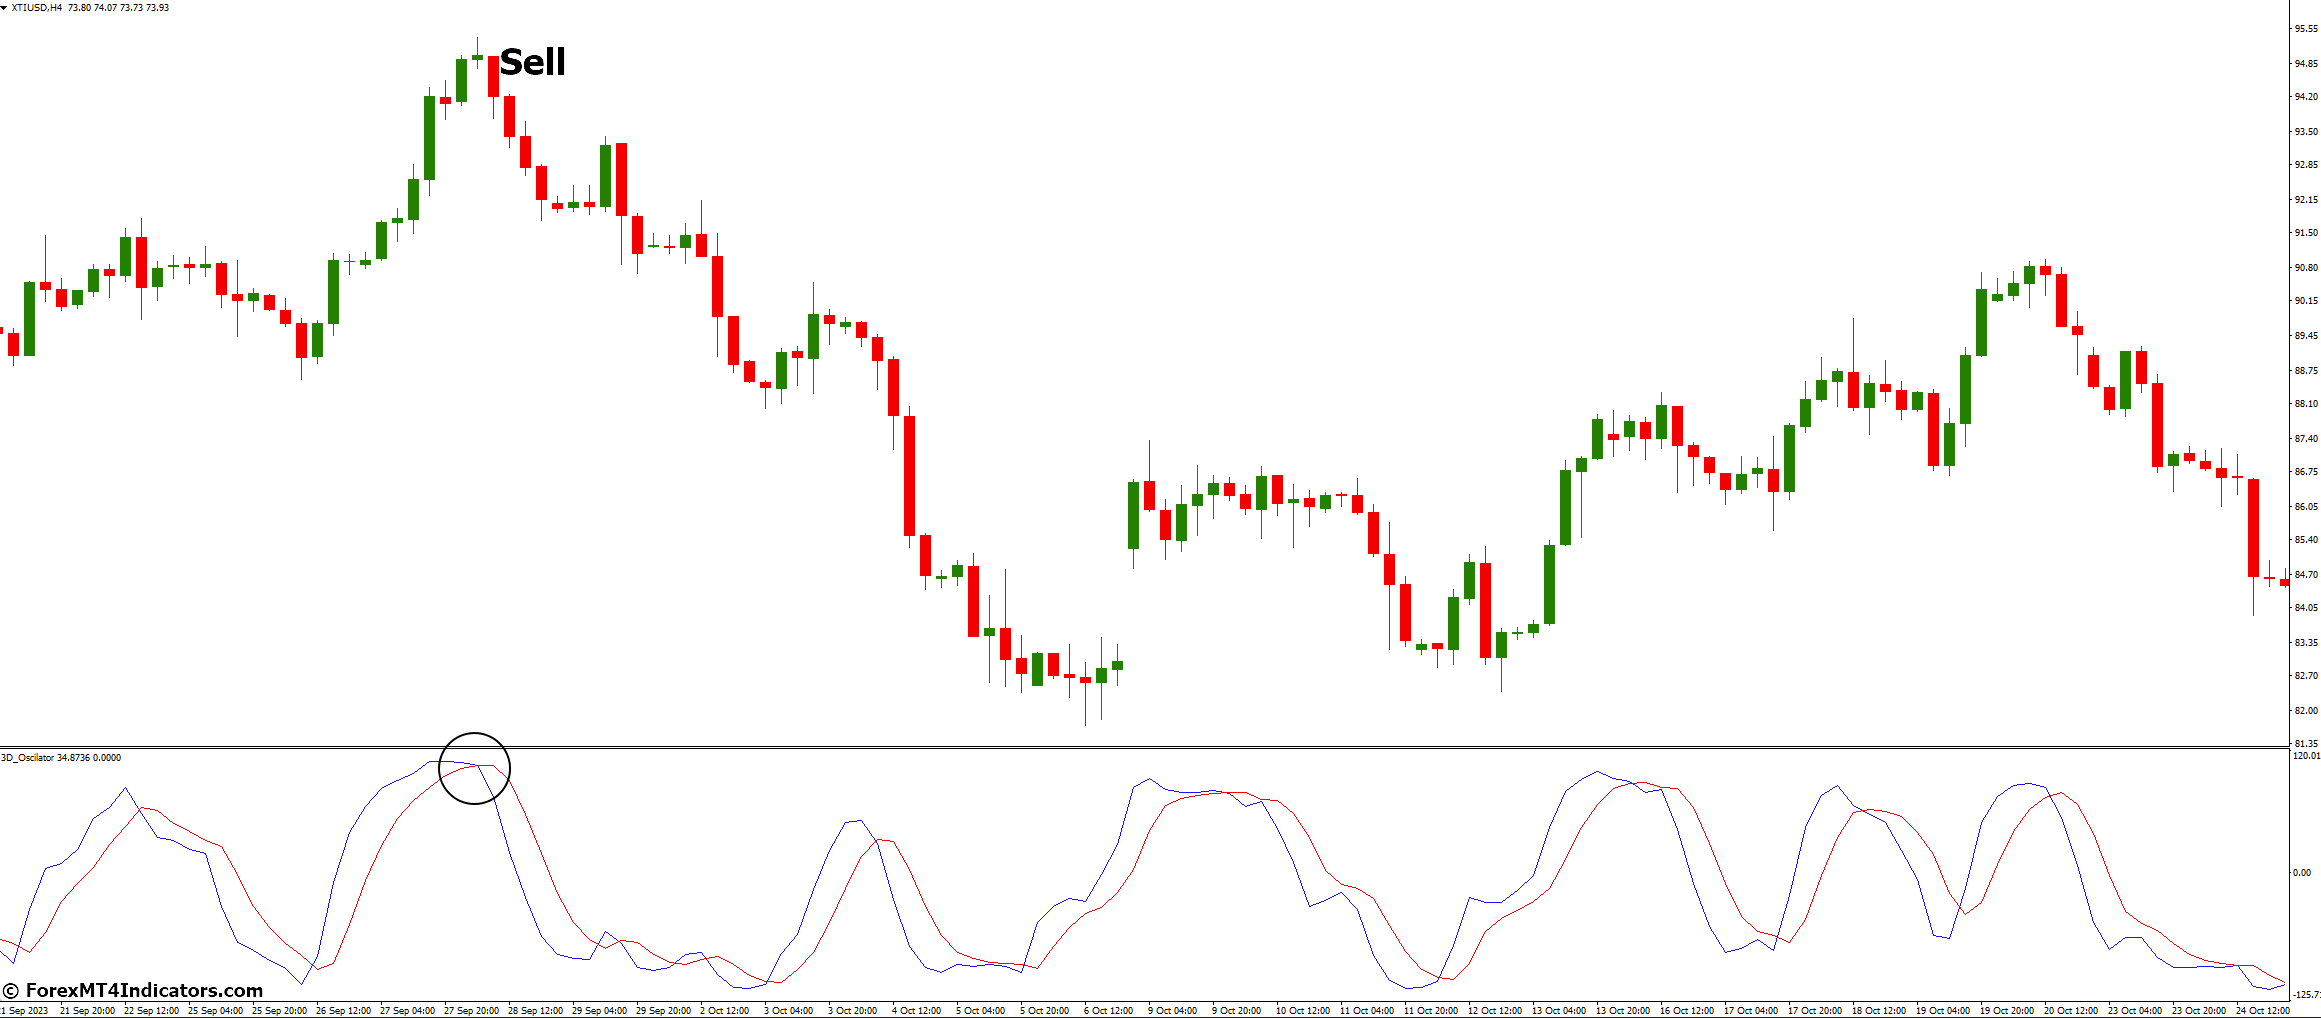 How to Trade with 3D Oscilator Indicator - Sell Entry